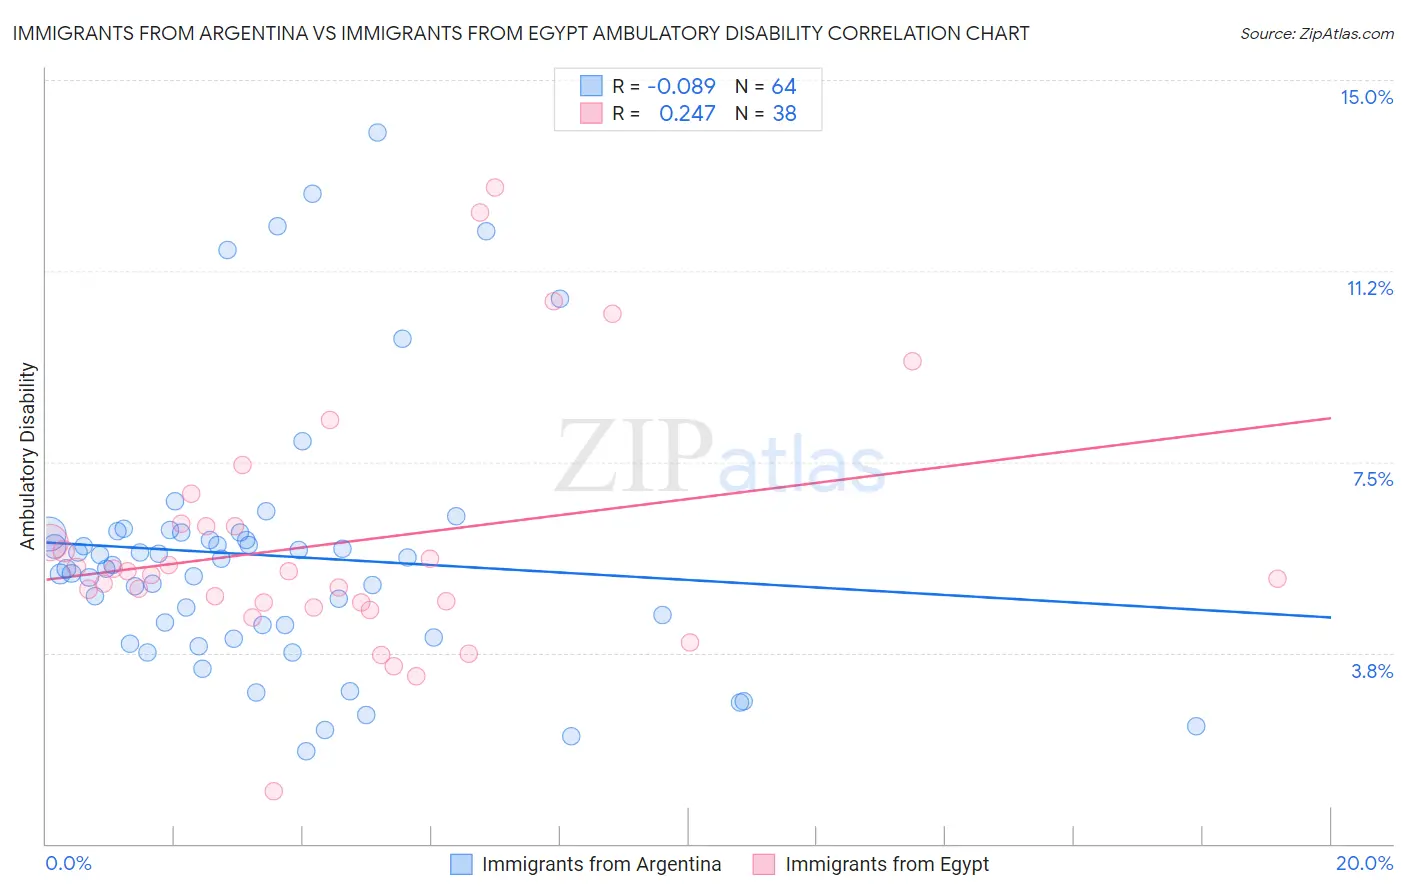 Immigrants from Argentina vs Immigrants from Egypt Ambulatory Disability